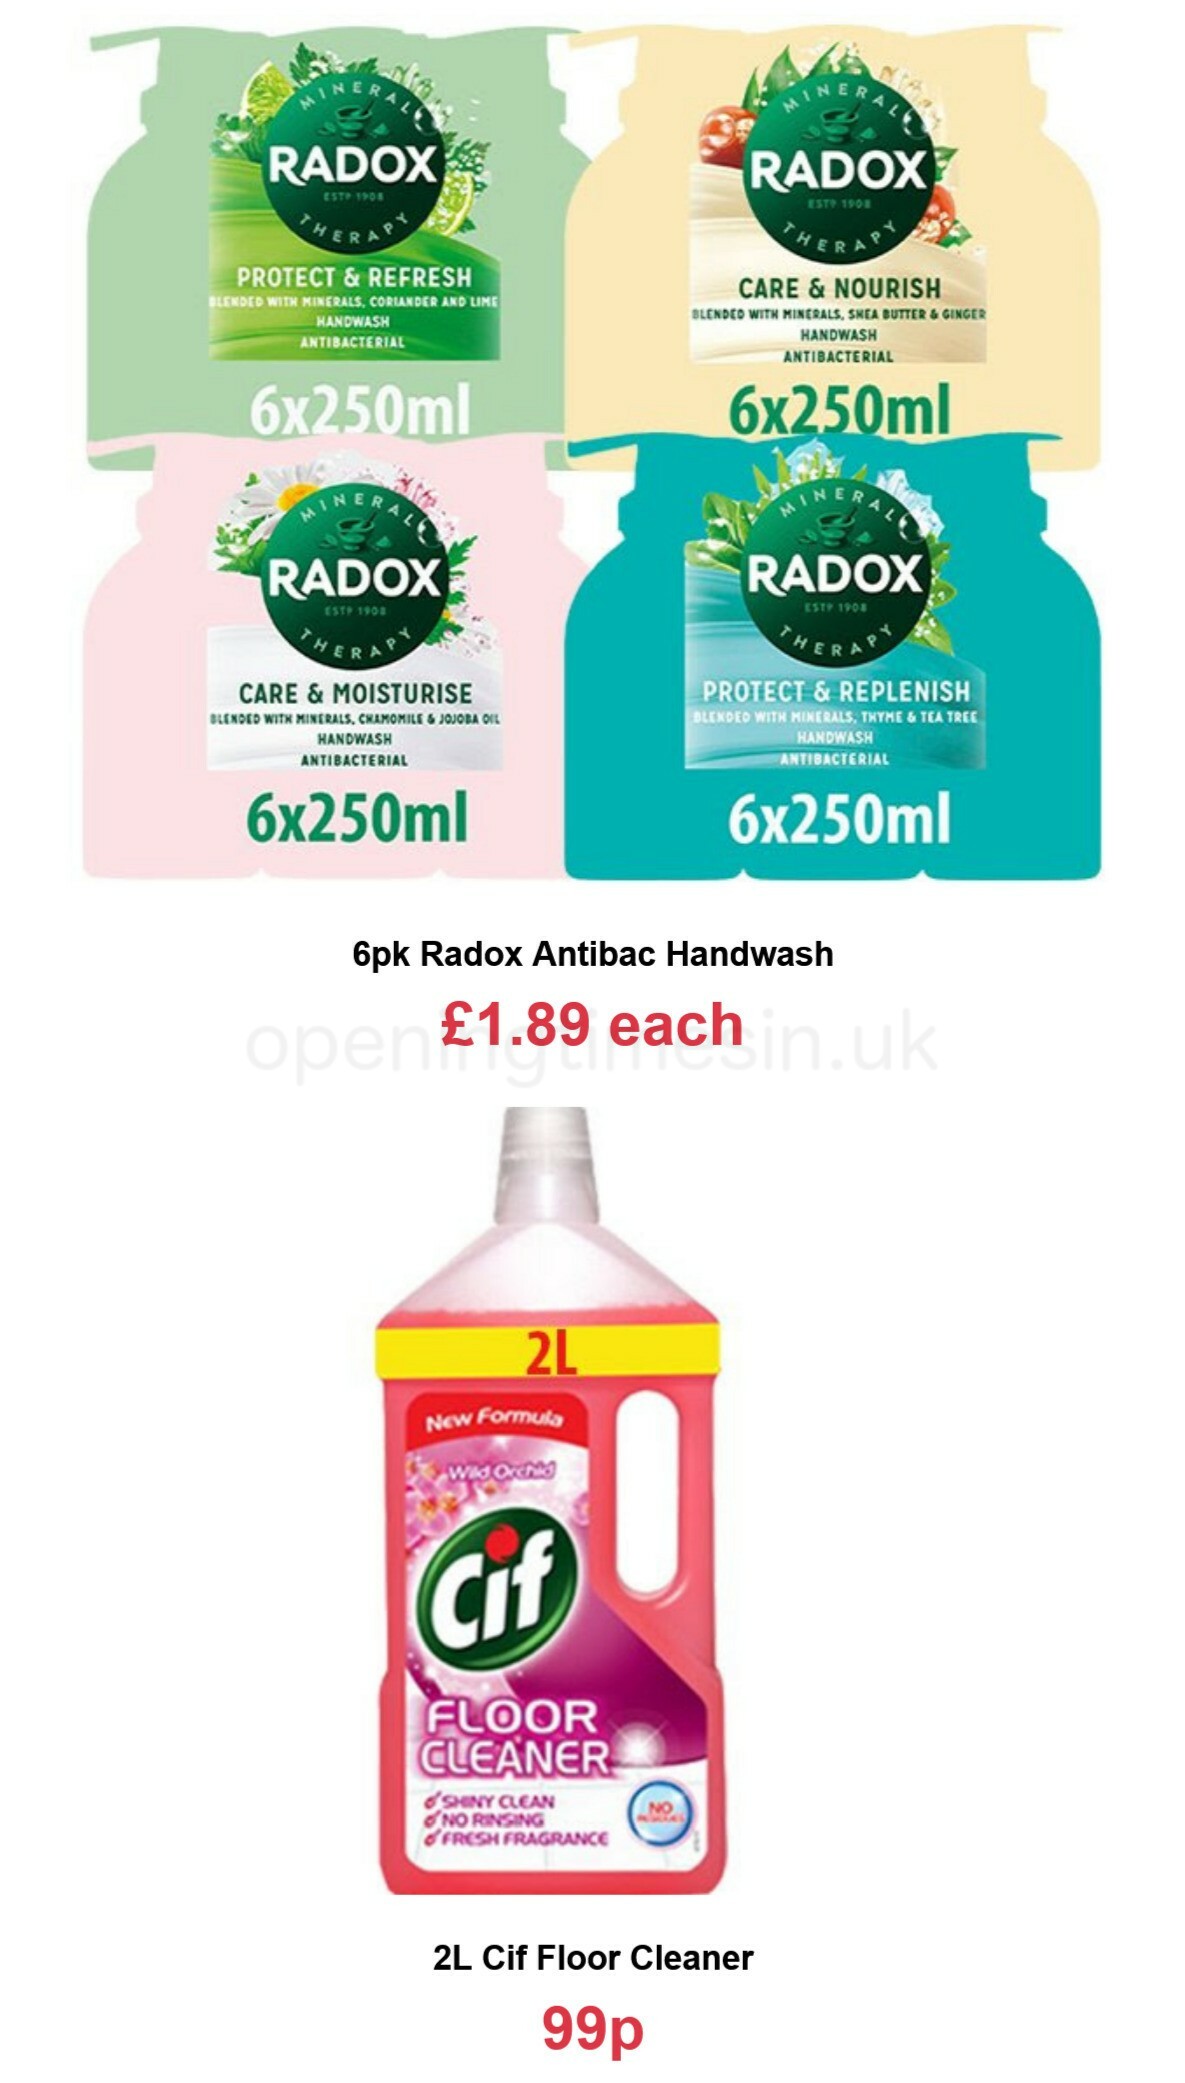 Farmfoods Offers from 6 May